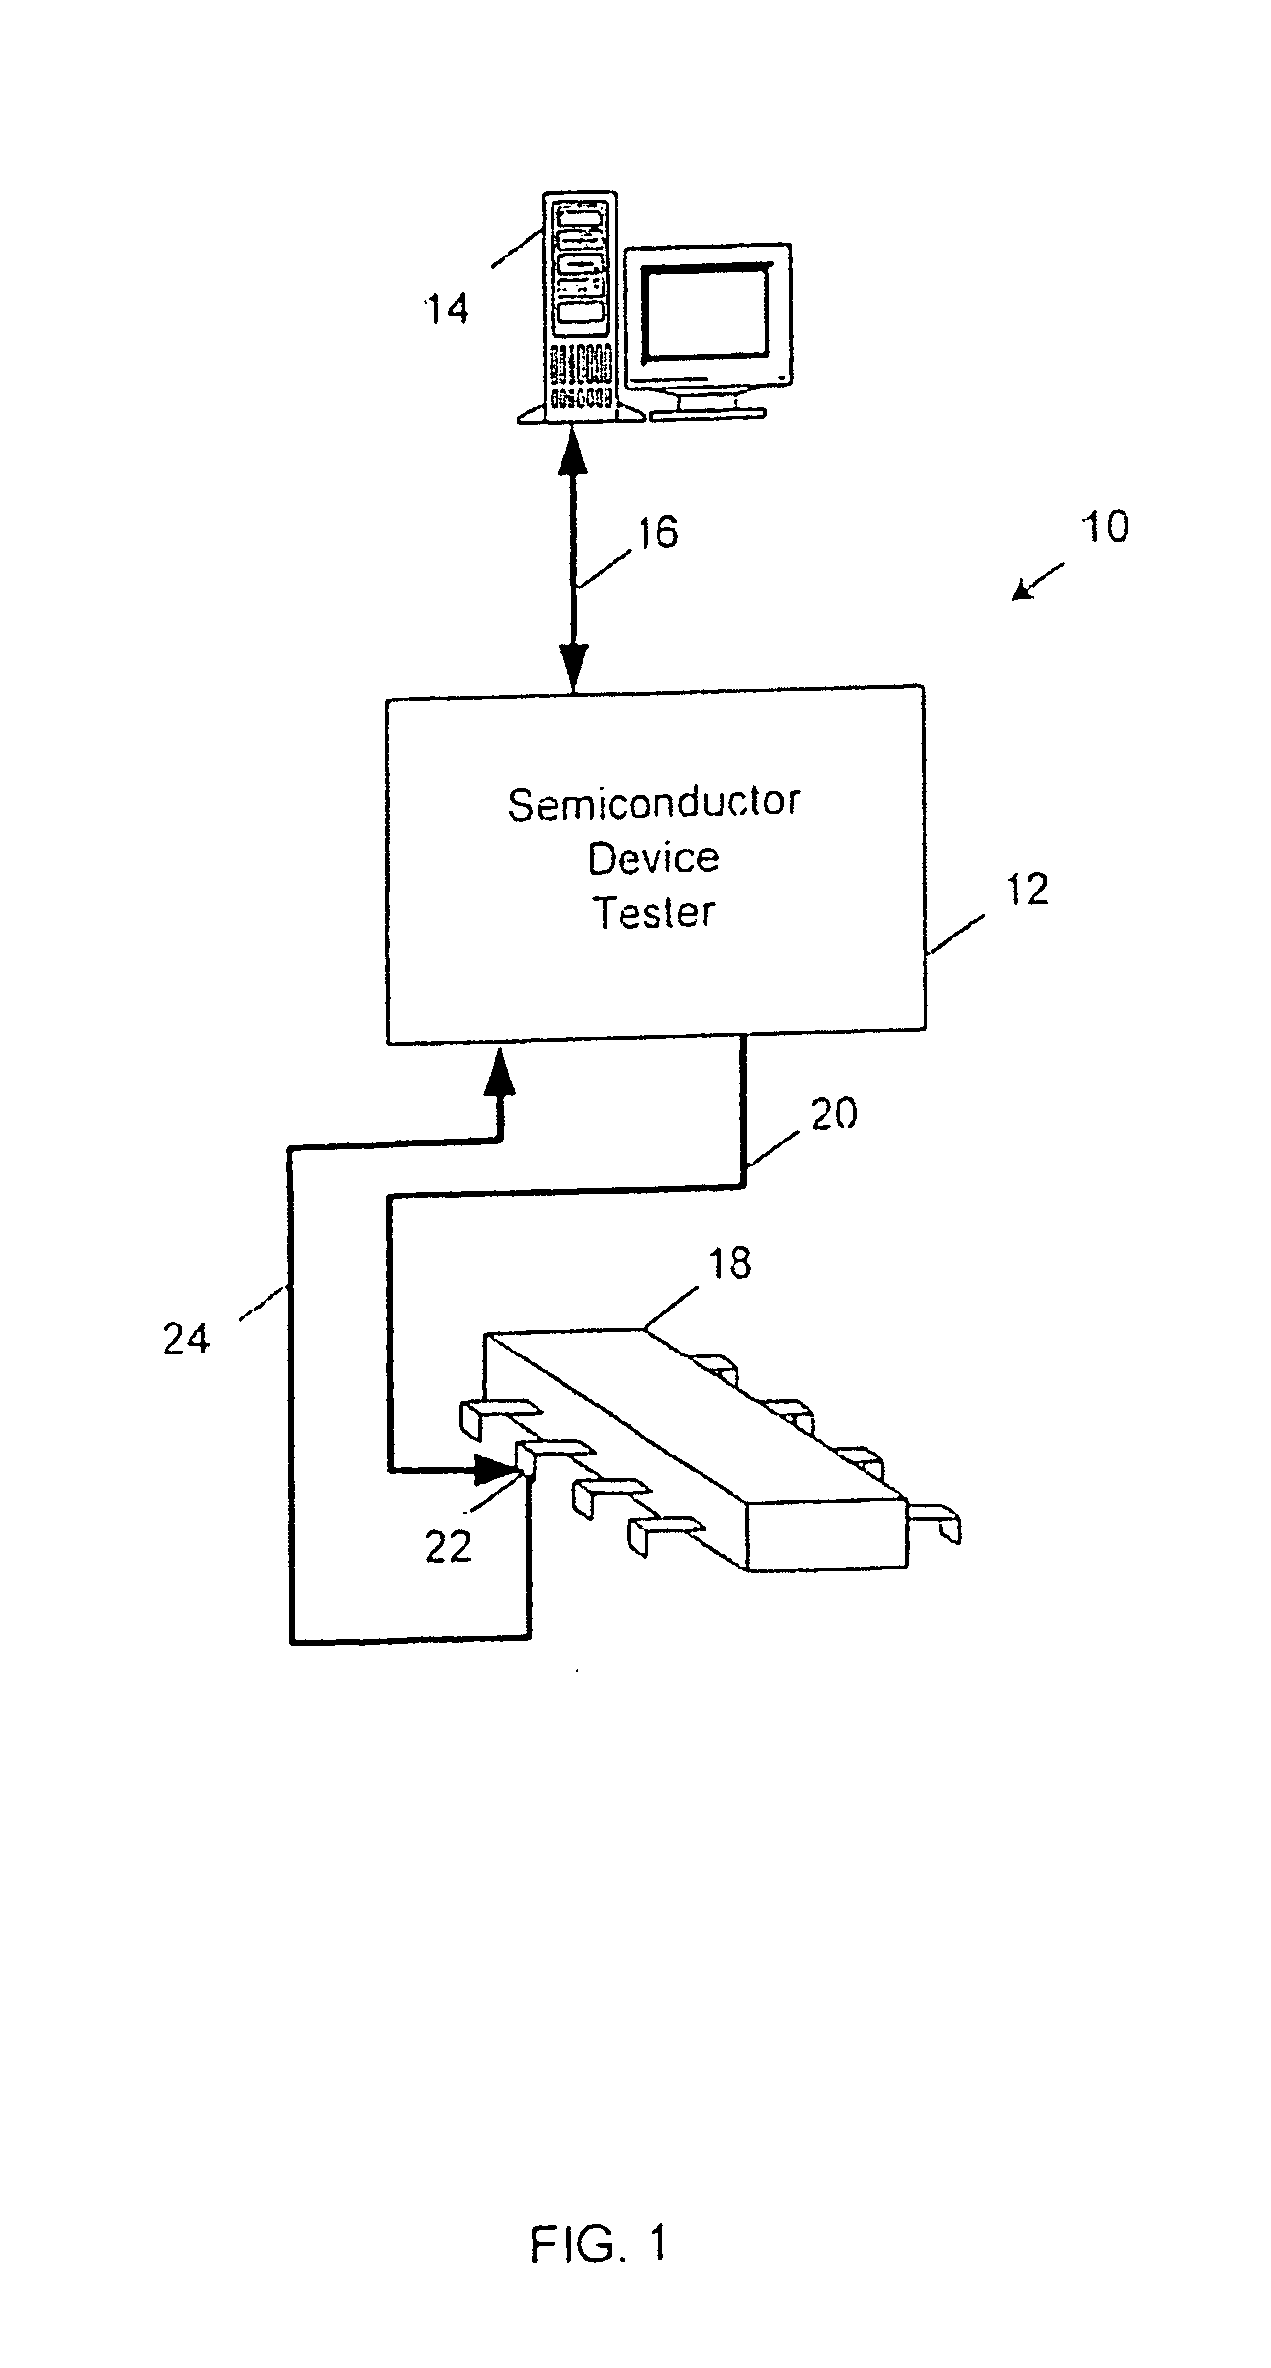 Method and system for monitoring test signals for semiconductor devices